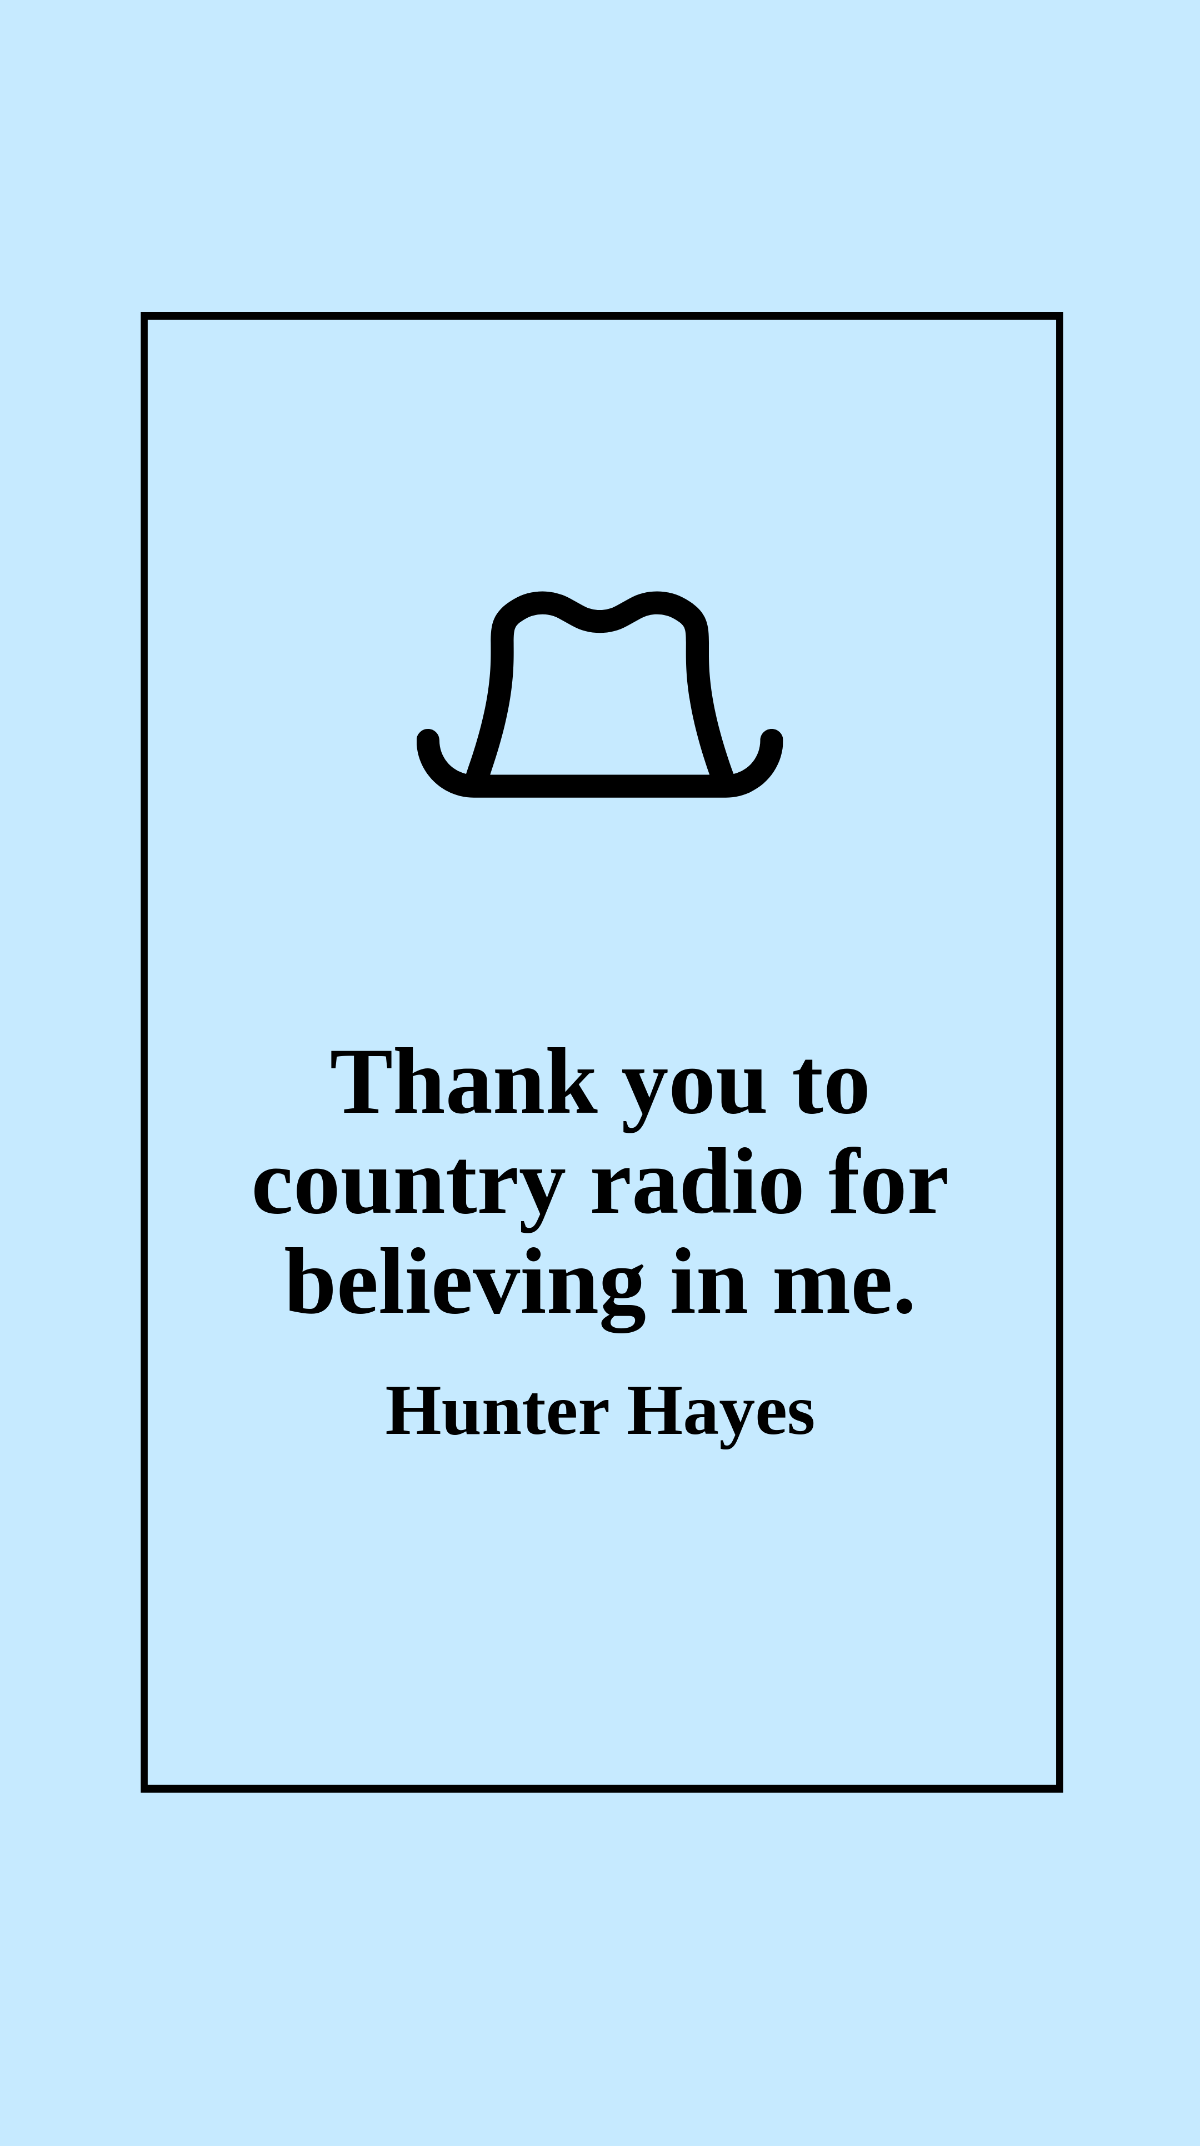 Hunter Hayes - Thank you to country radio for believing in me.